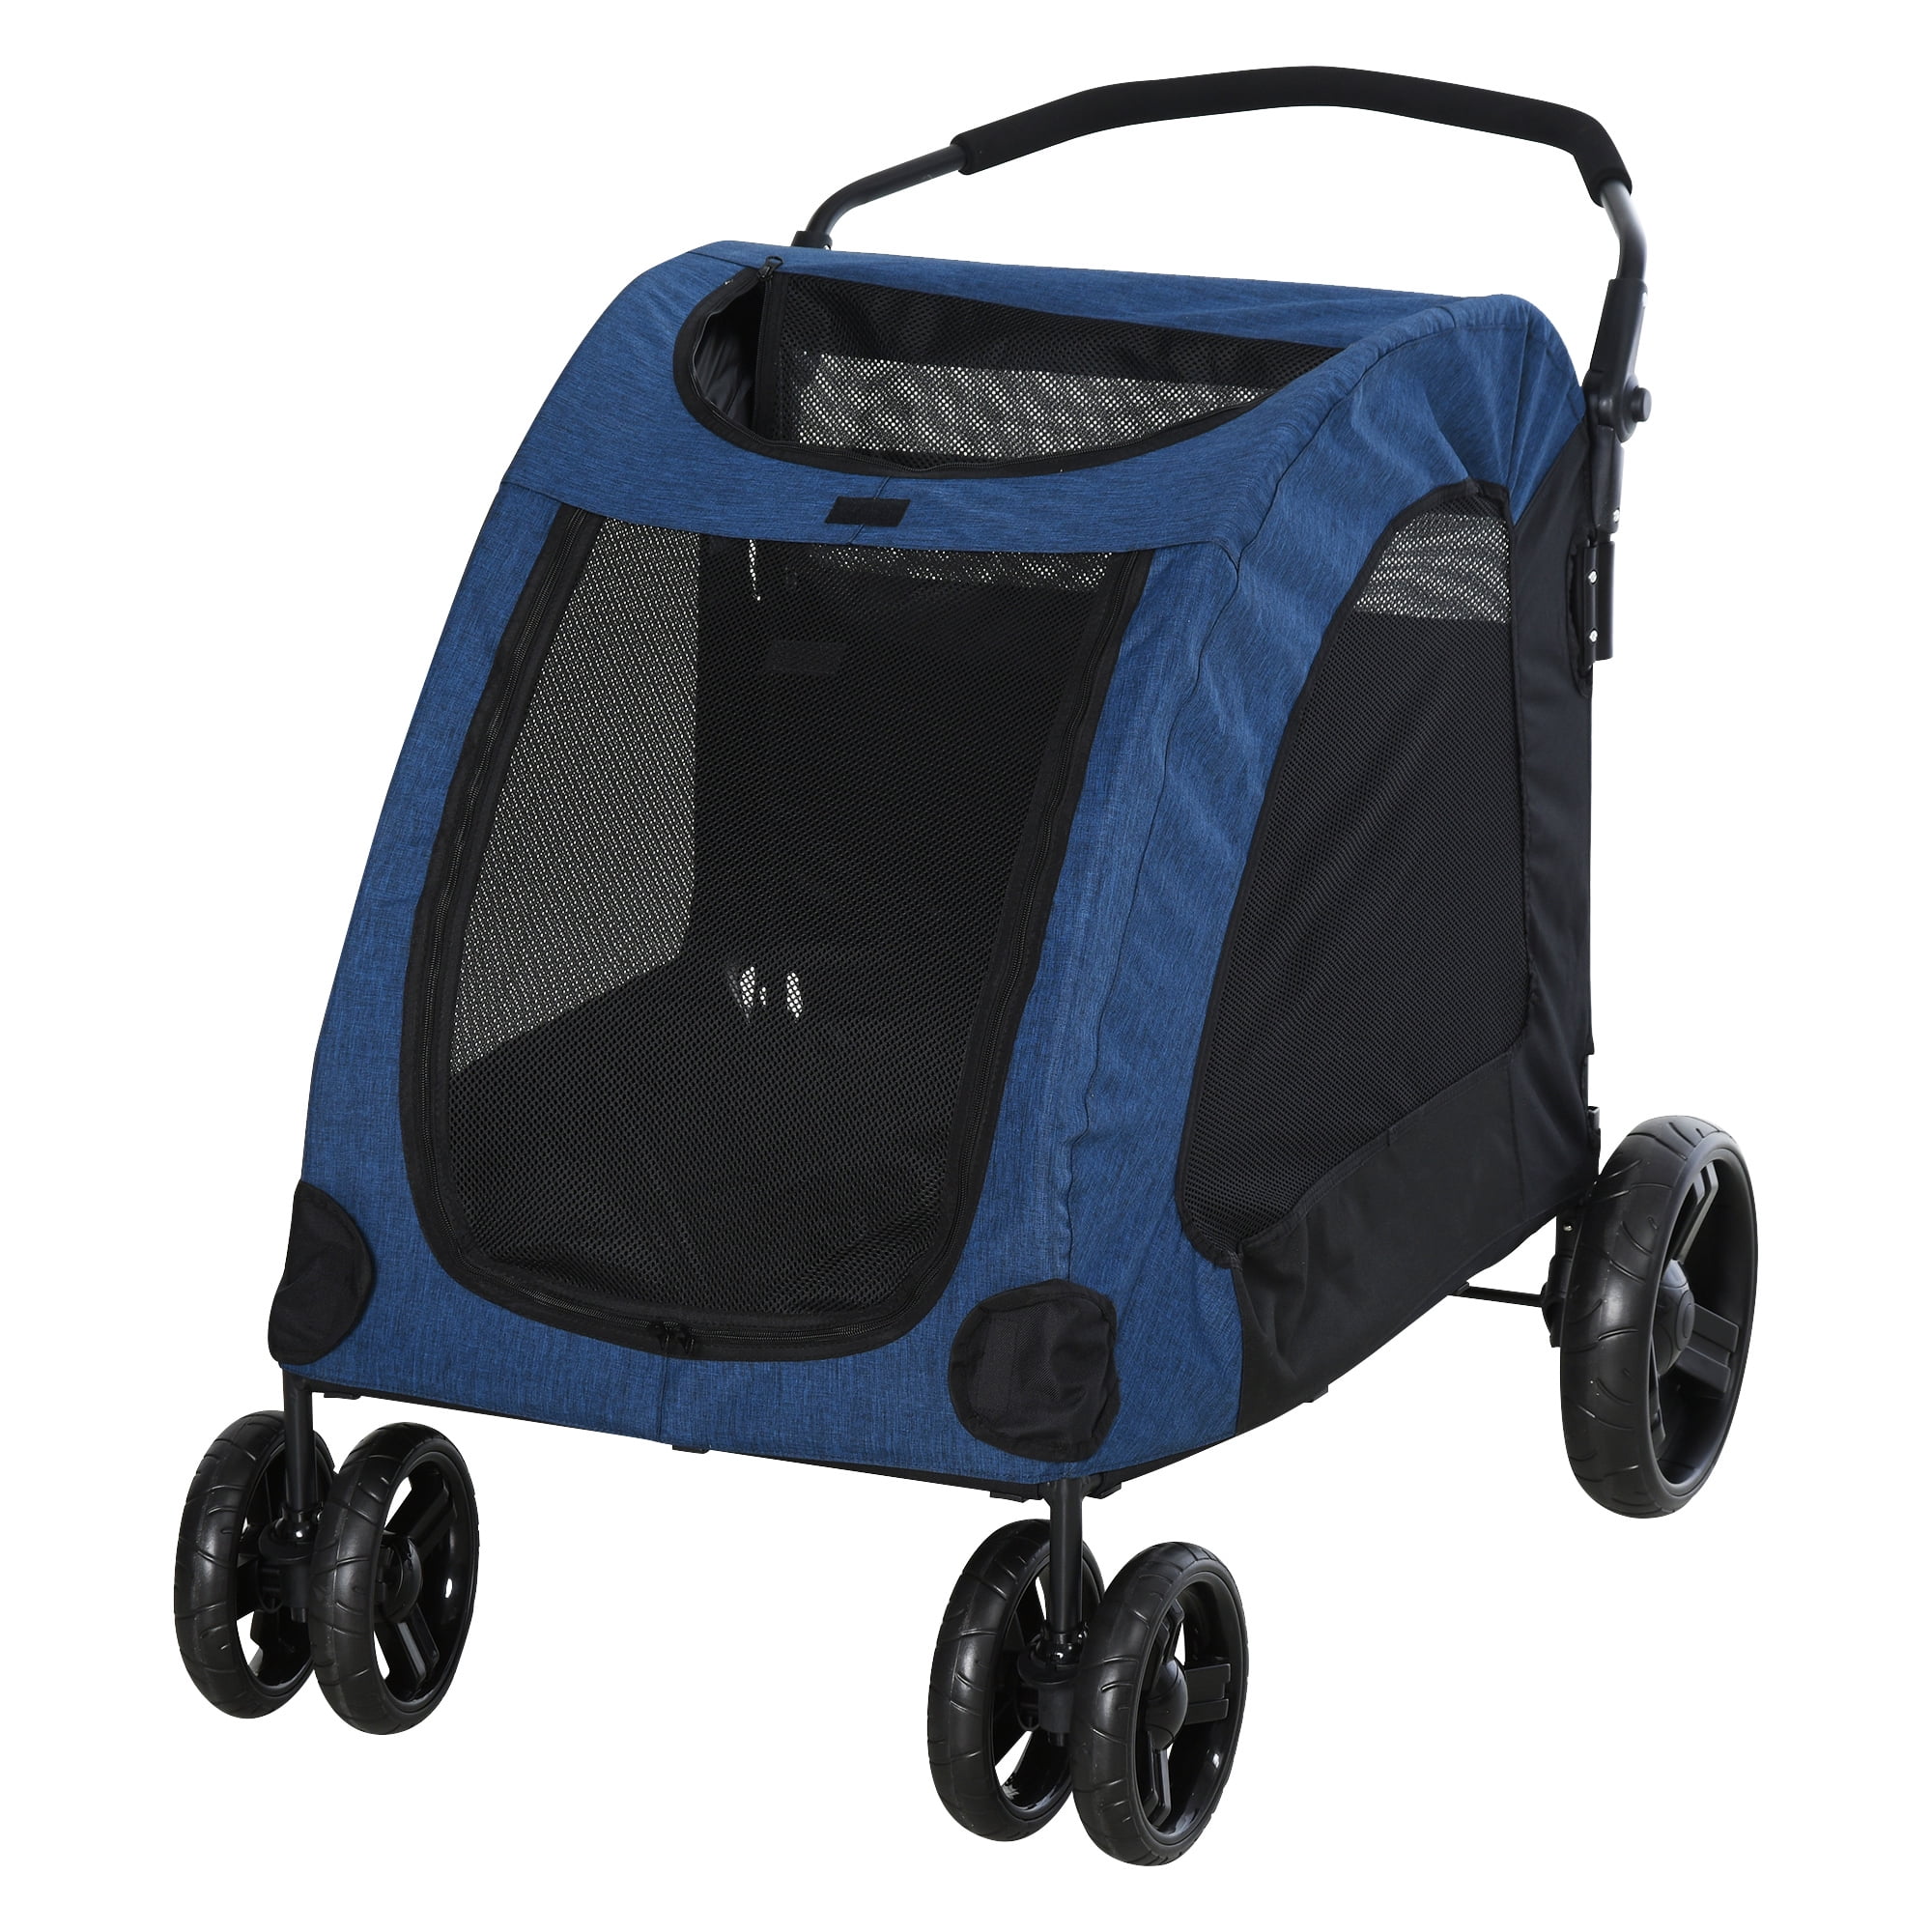 Oxford Fabric for Medium or Large Size Dogs Blue PawHut Foldable Dog Stroller with Storage Pocket 